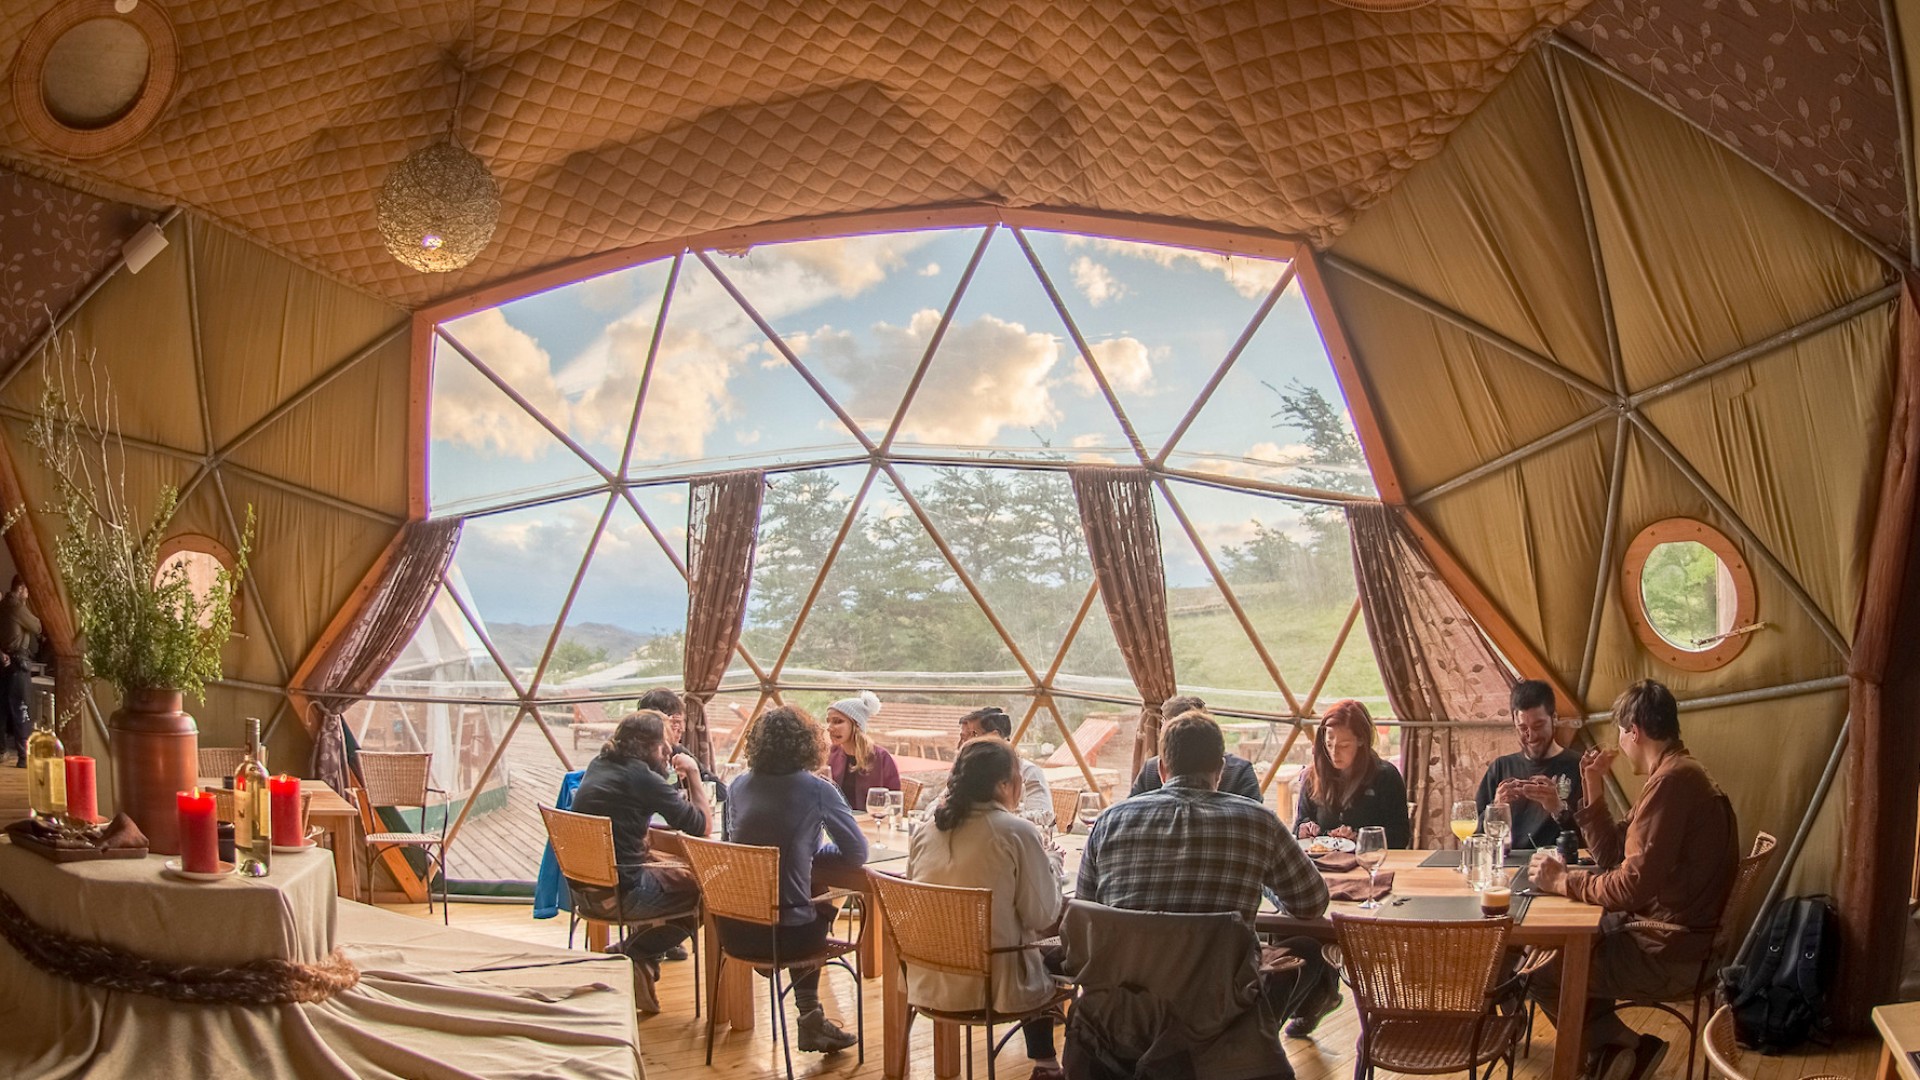 geodesic dome in torres del paine national park